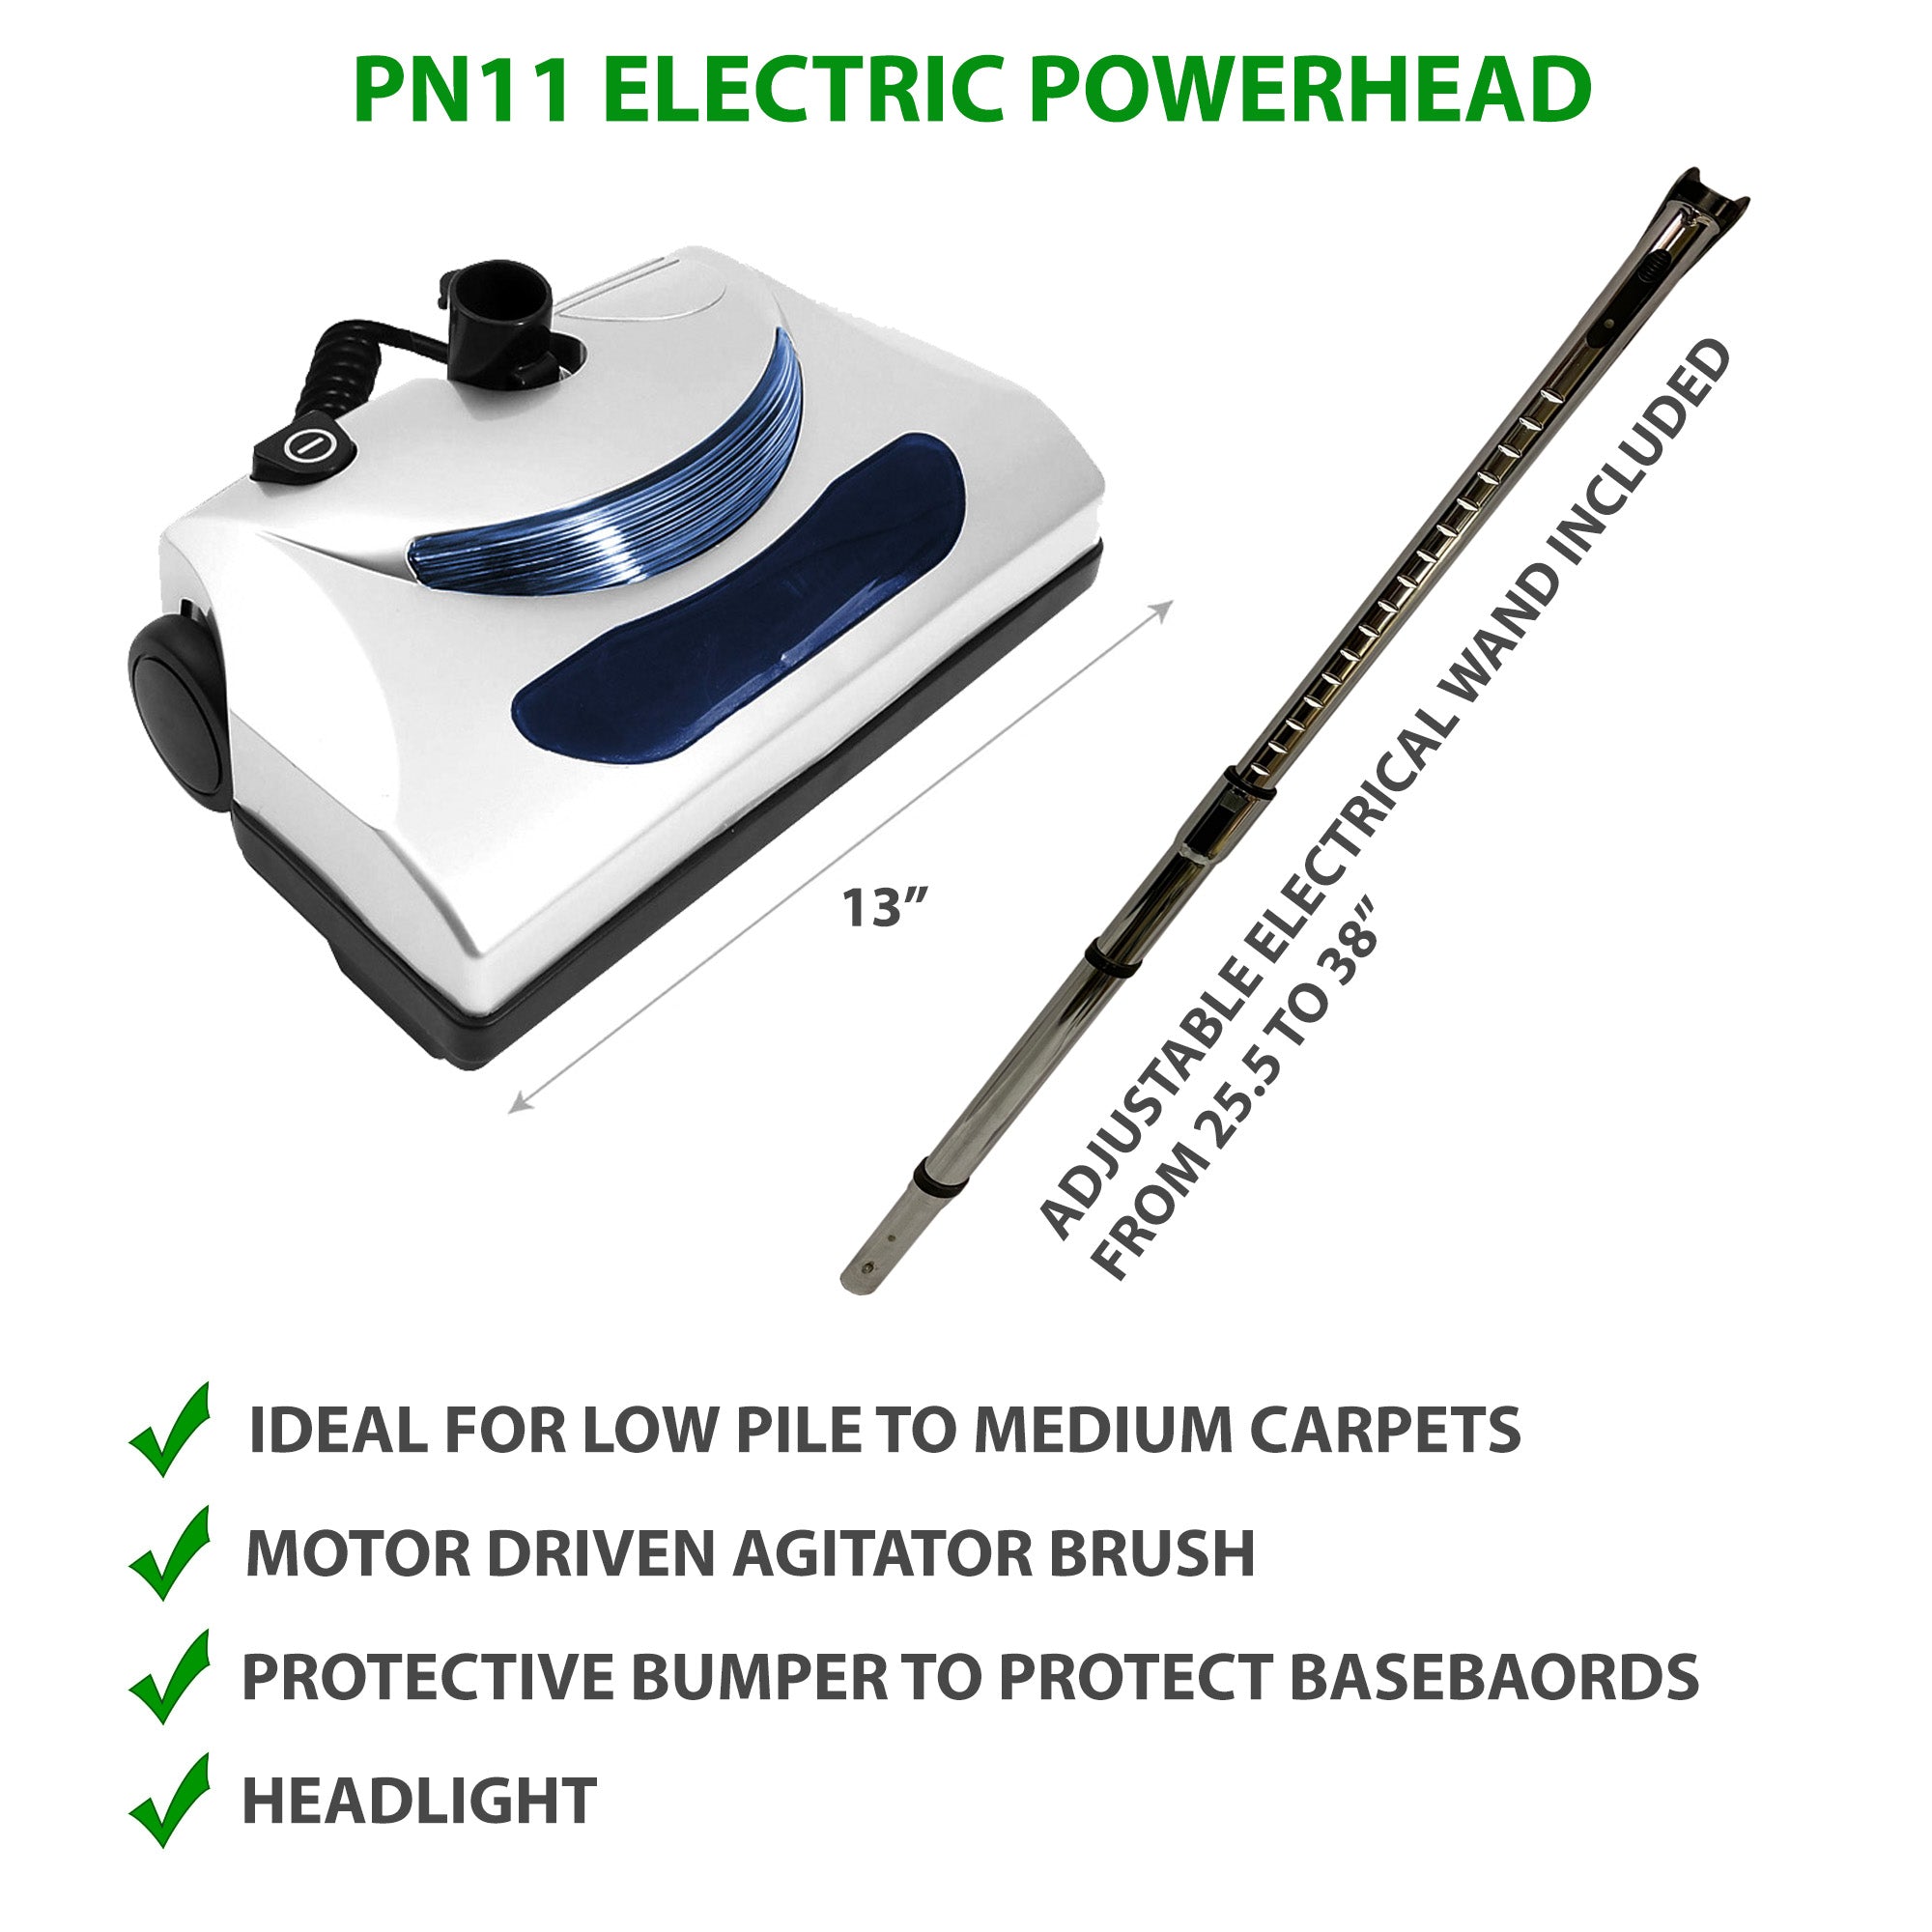 PN11 Electric Powerhead with adustable electrical wand